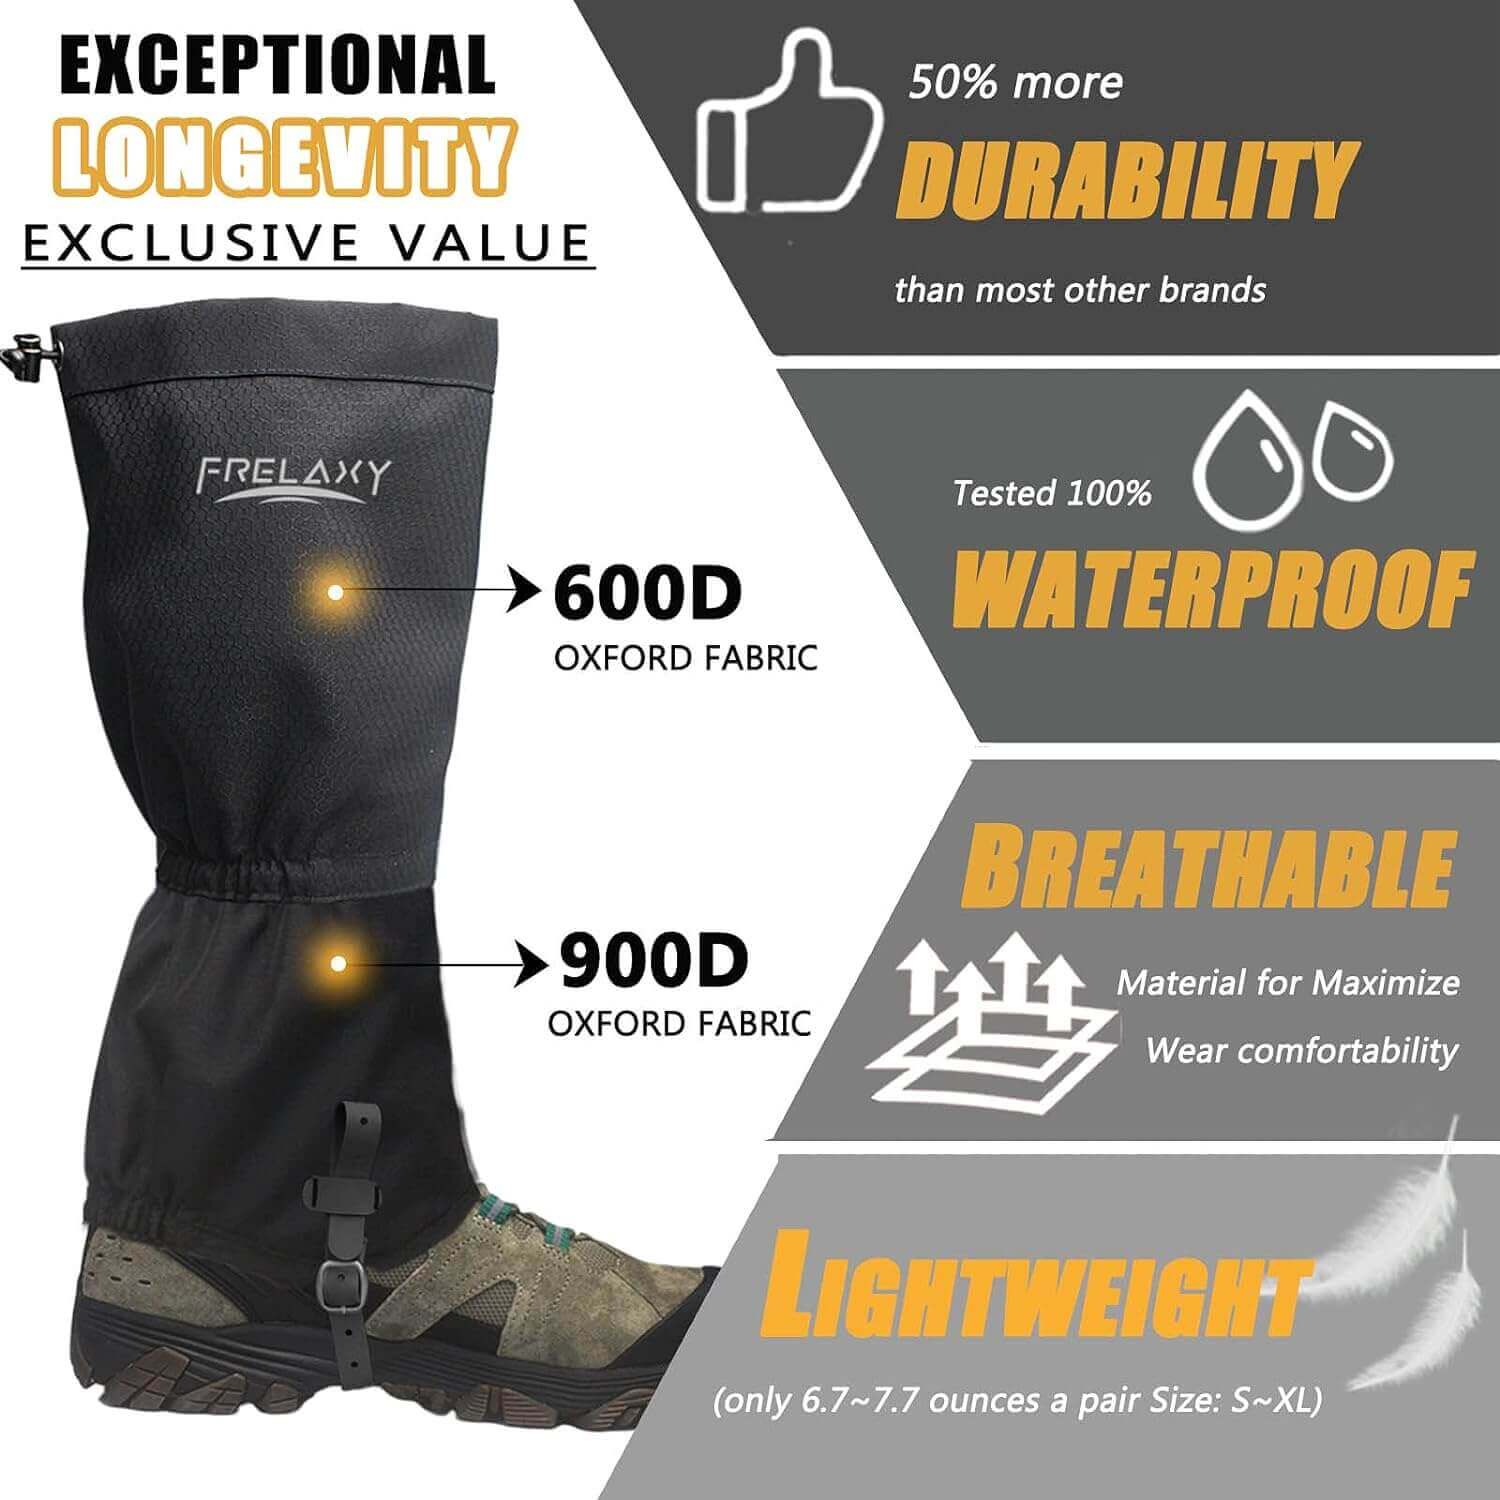 Shop The Latest >Ultra High-Performance 100% Waterproof Hiking Gaiters > *Only $40.49*> From The Top Brand > *Frelaxyl* > Shop Now and Get Free Shipping On Orders Over $45.00 >*Shop Earth Foot*